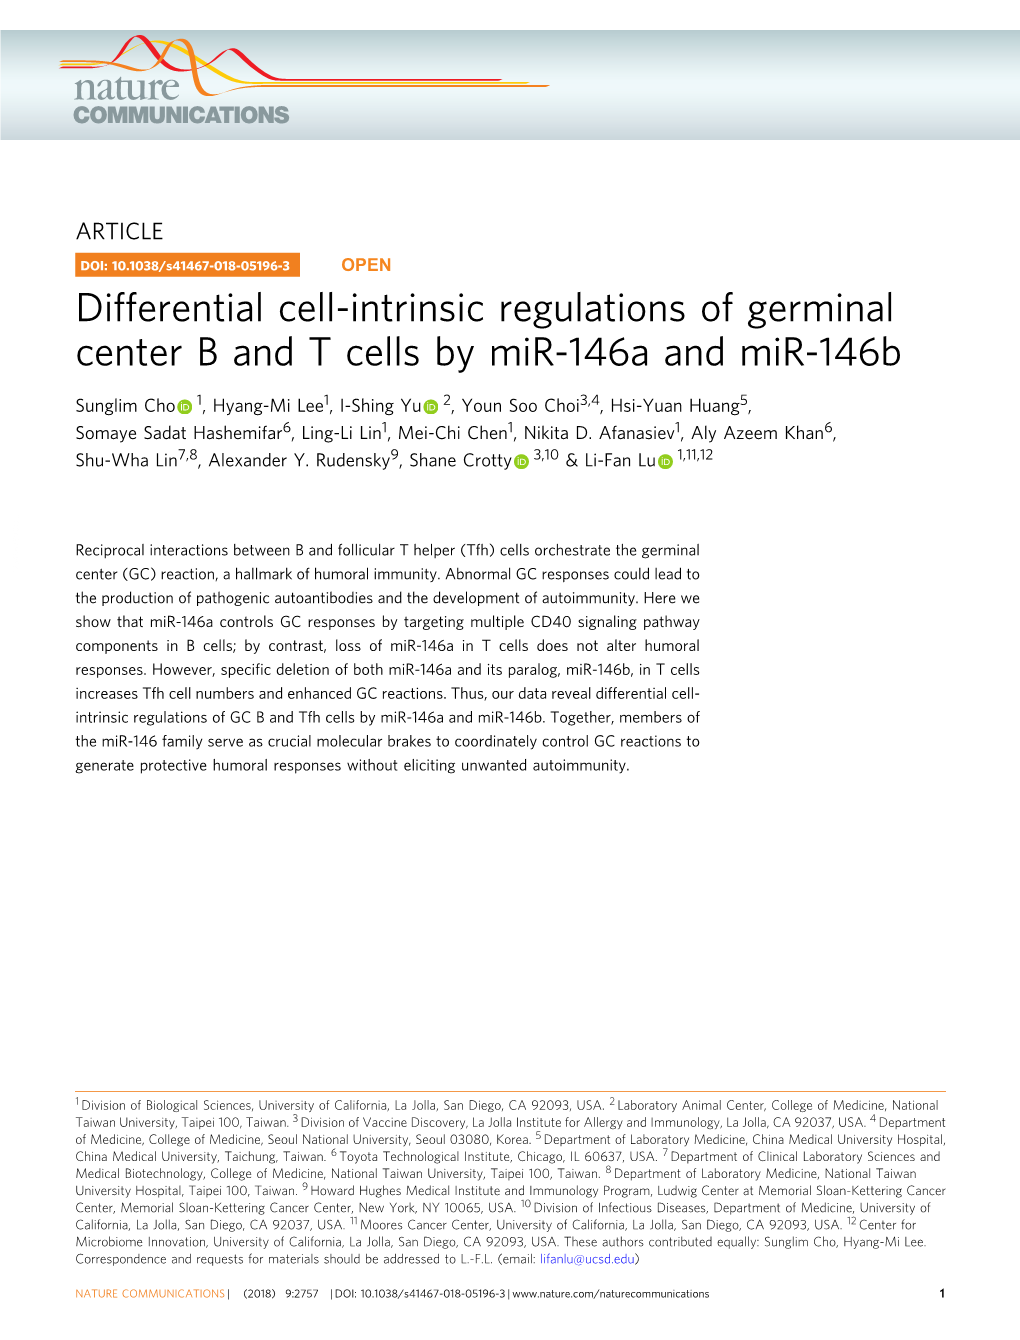 Differential Cell-Intrinsic Regulations of Germinal Center B and T Cells by Mir-146A and Mir-146B